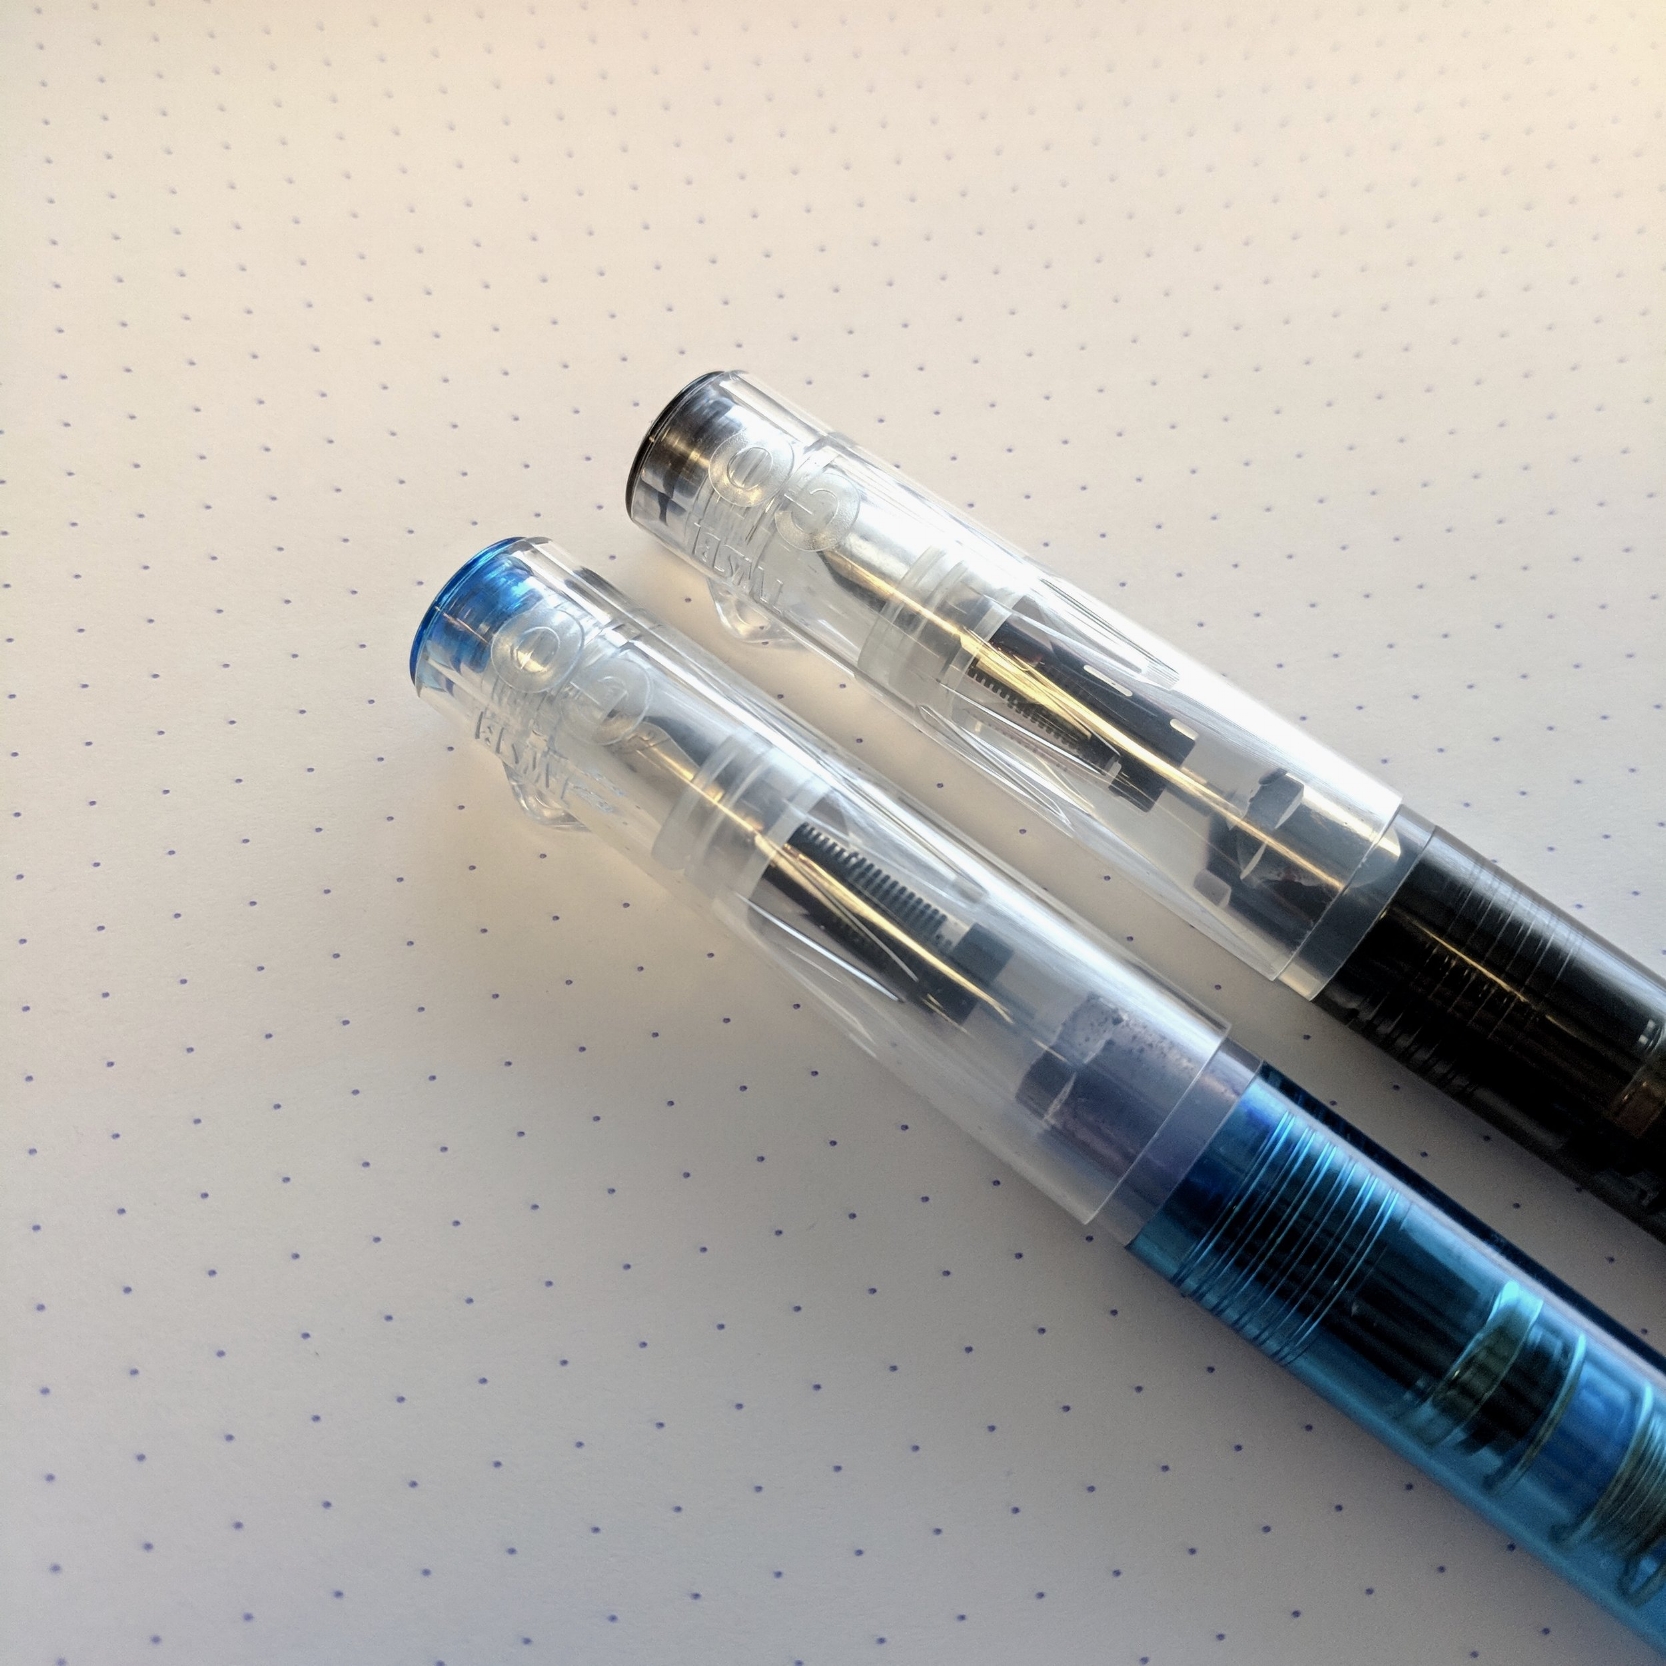 So Ugly It's Cute? My Thoughts on the TWSBI Go — The Gentleman Stationer